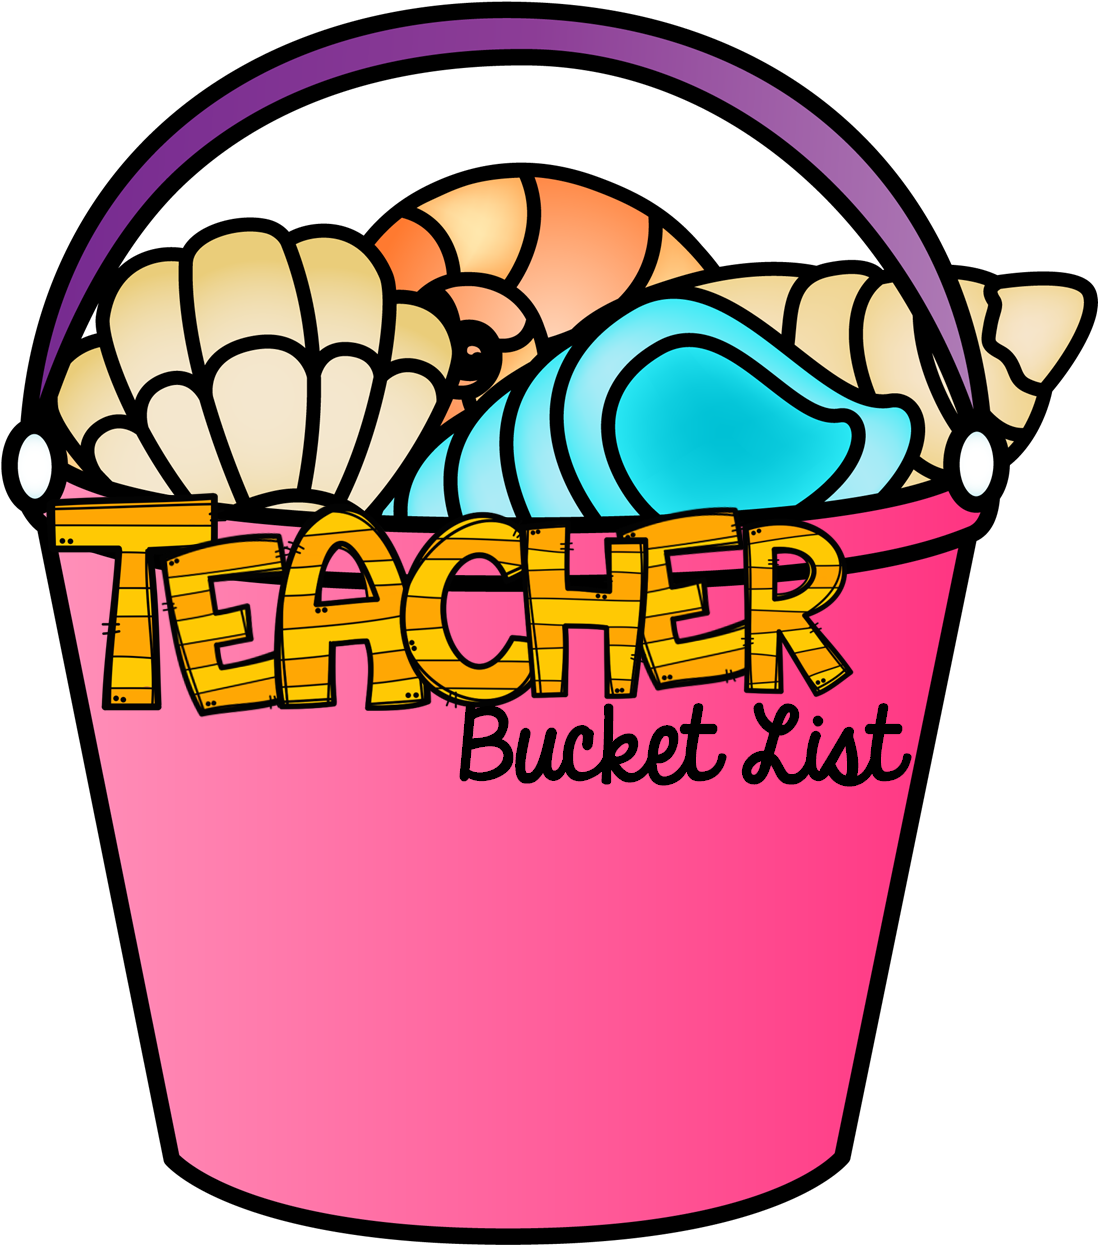 Want To Share Your Teacher Bucket List - Want To Share Your Teacher Bucket List (1107x1289)